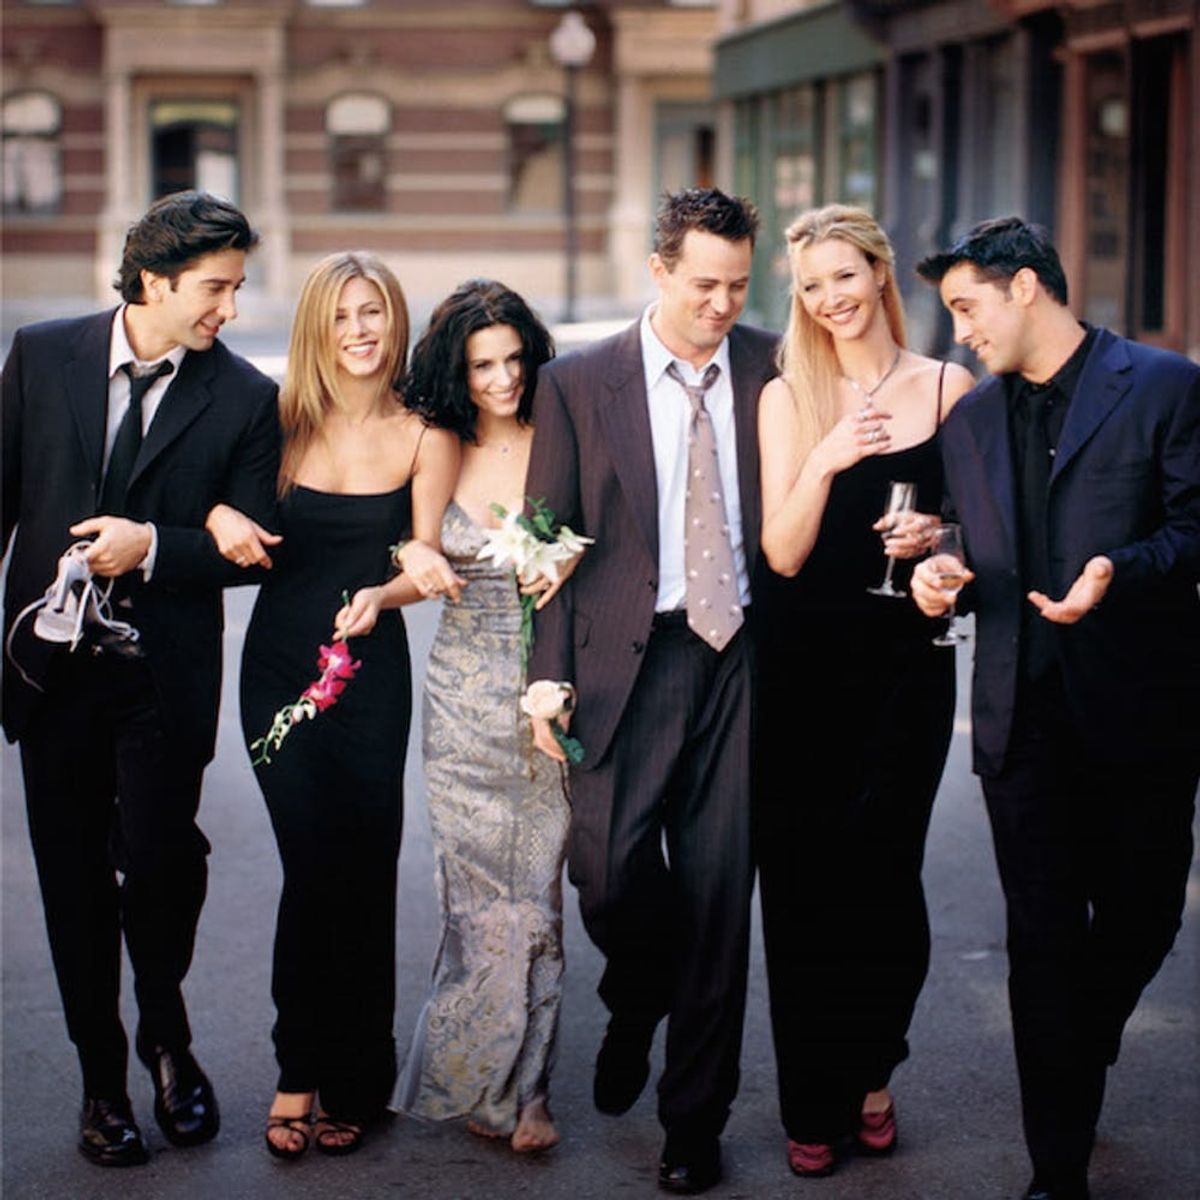 What If “Friends” Took Place in 2015?